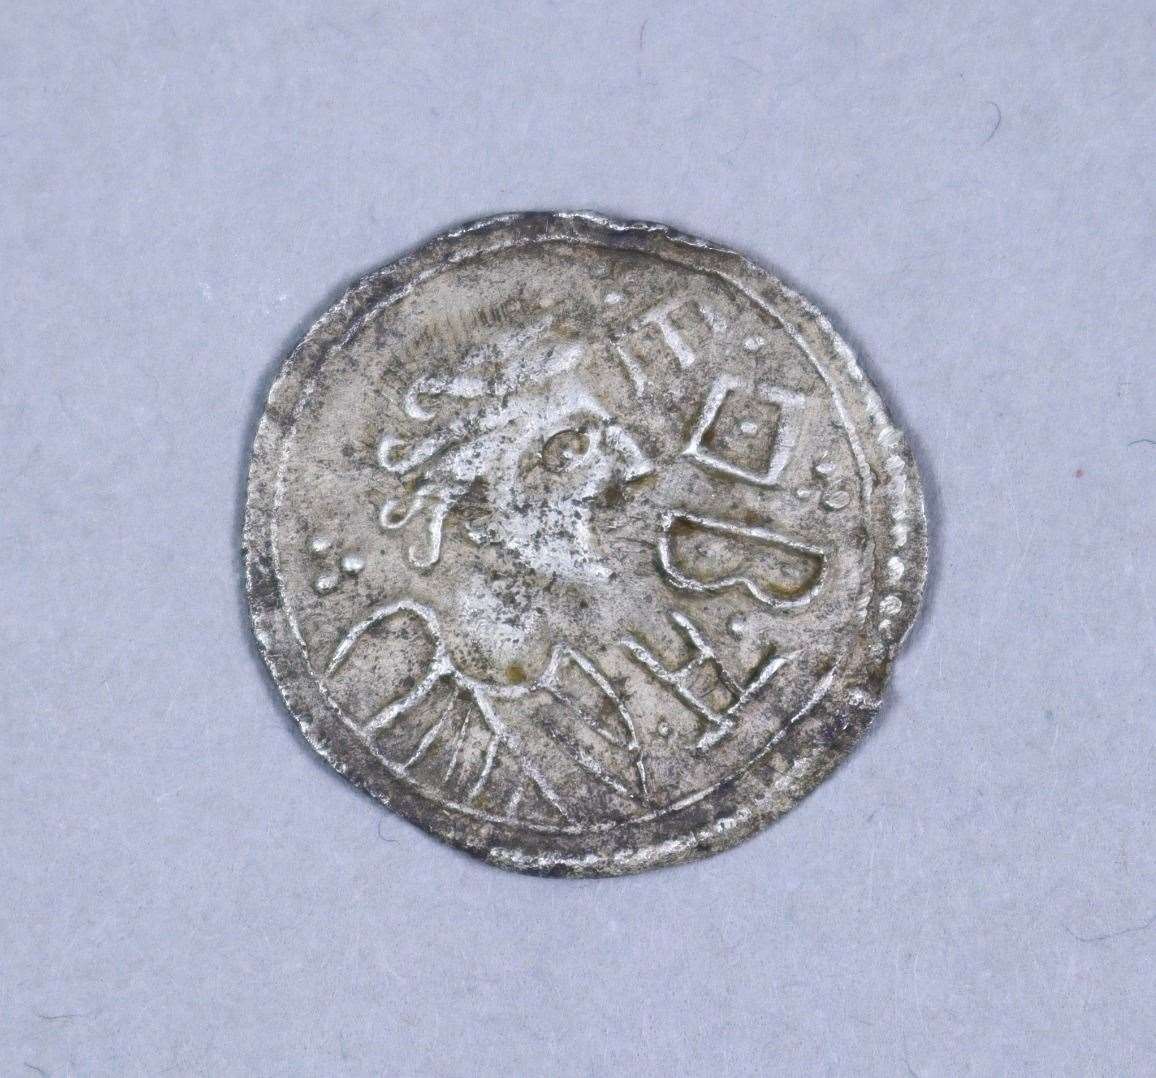 A silver penny minted in 757-796 showing Cynethryth, Queen of the Mercians and wife of King Offa, sold for £7,400 against an estimate of £1,000-1,500.